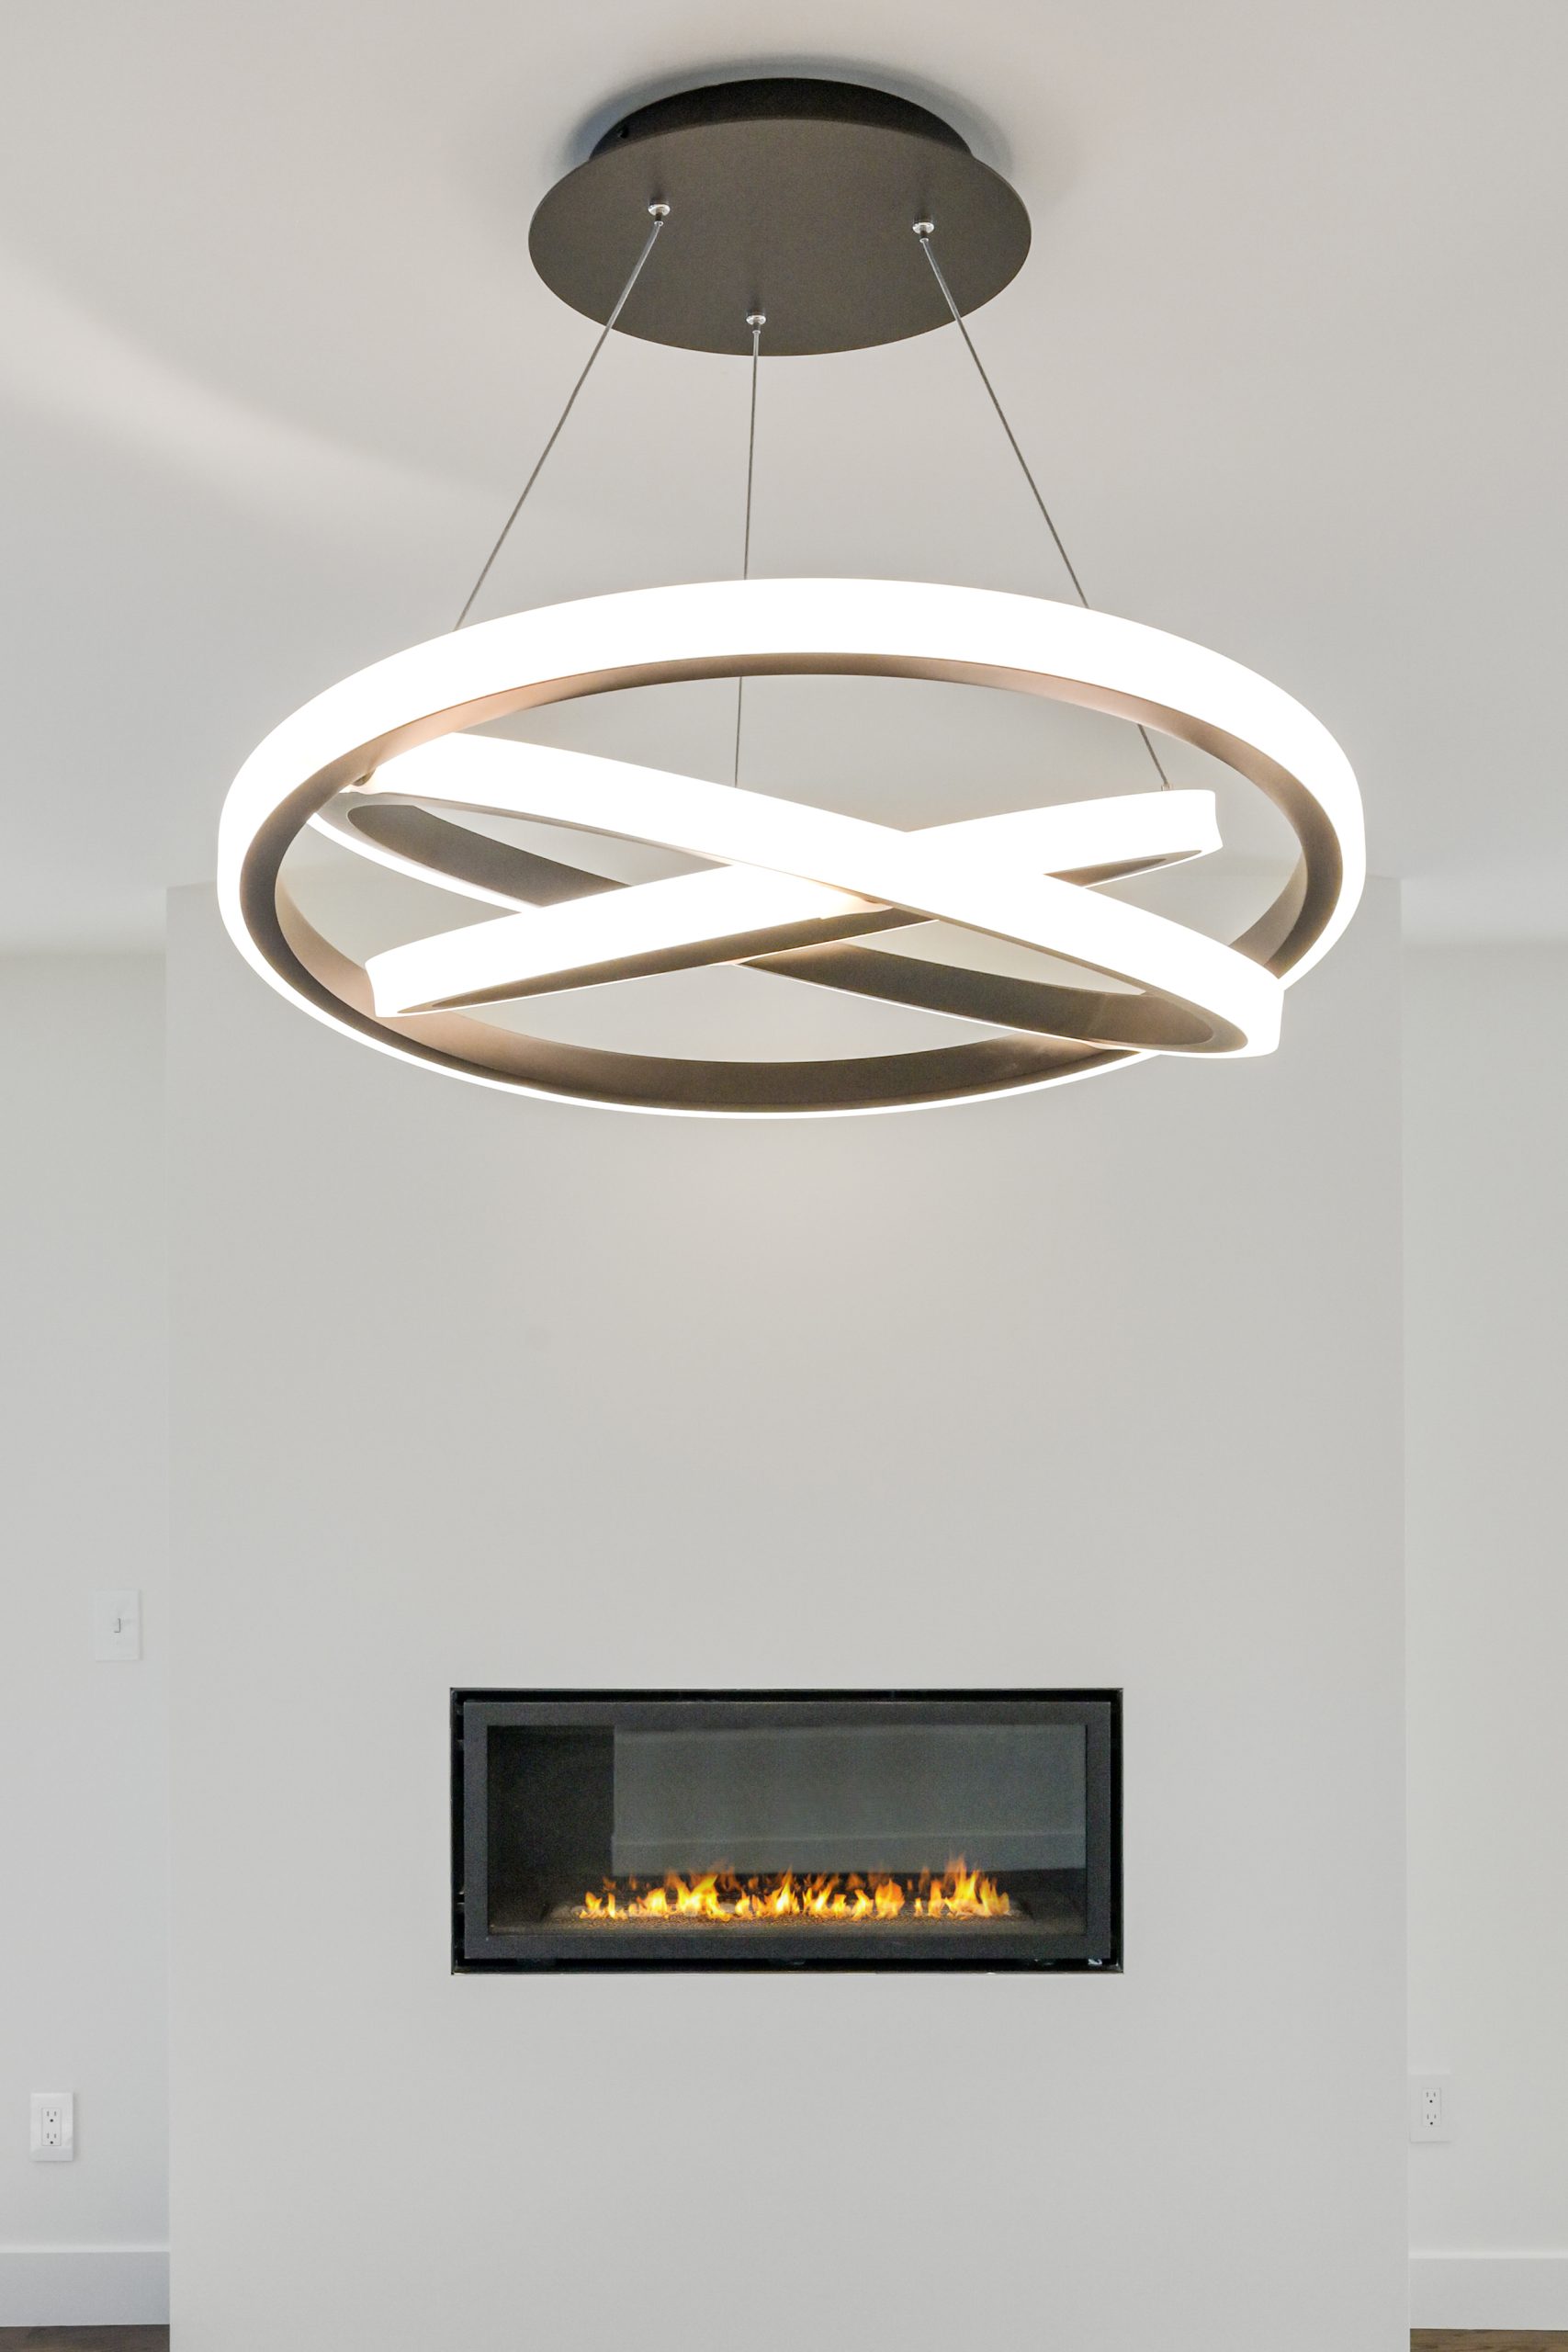 living room ceiling light fixture above a fireplace